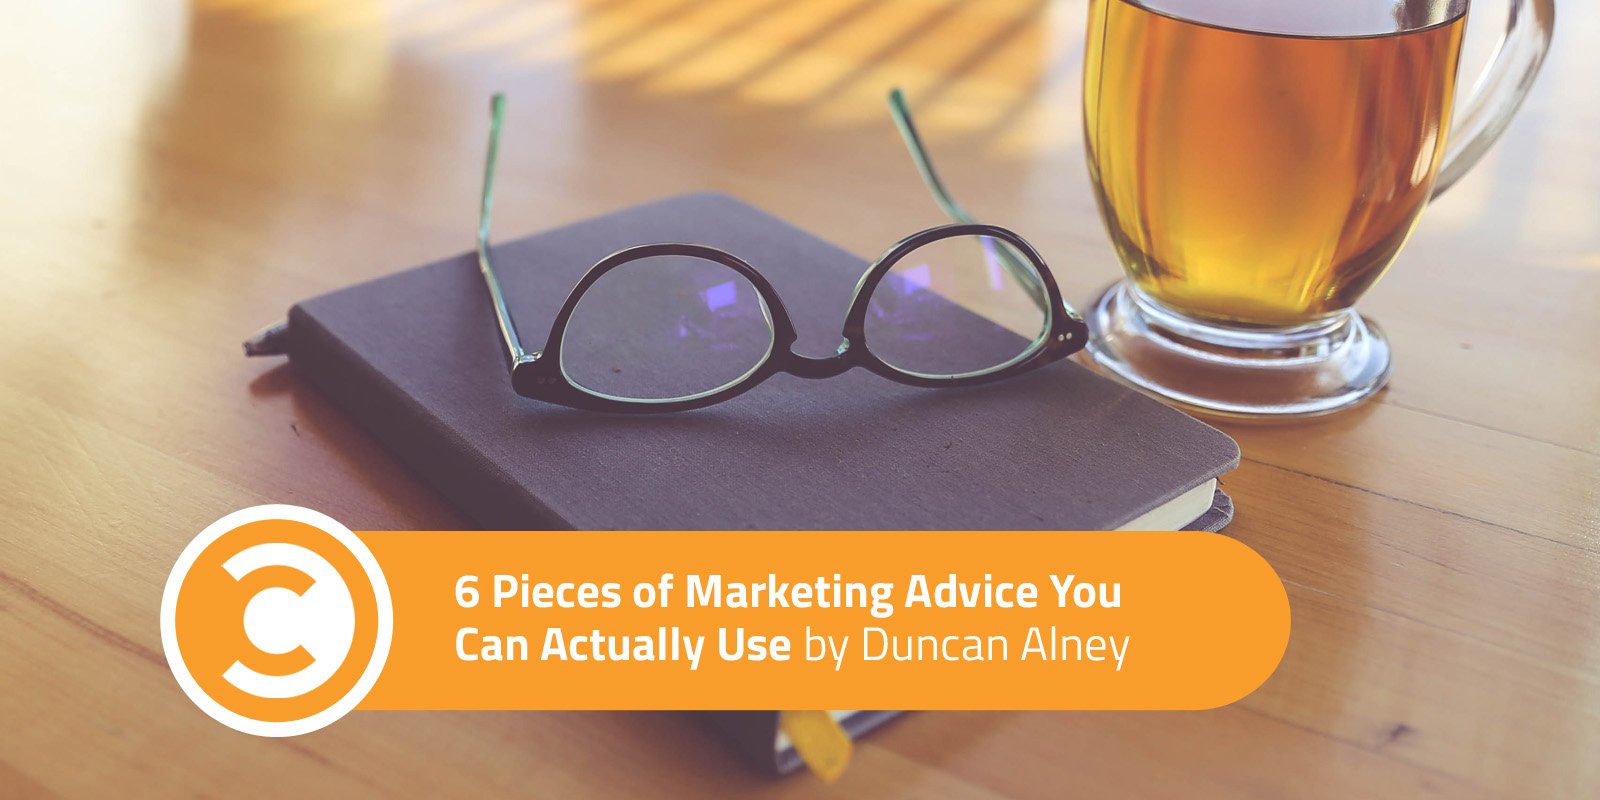 6 Pieces of Marketing Advice You Can Actually Use